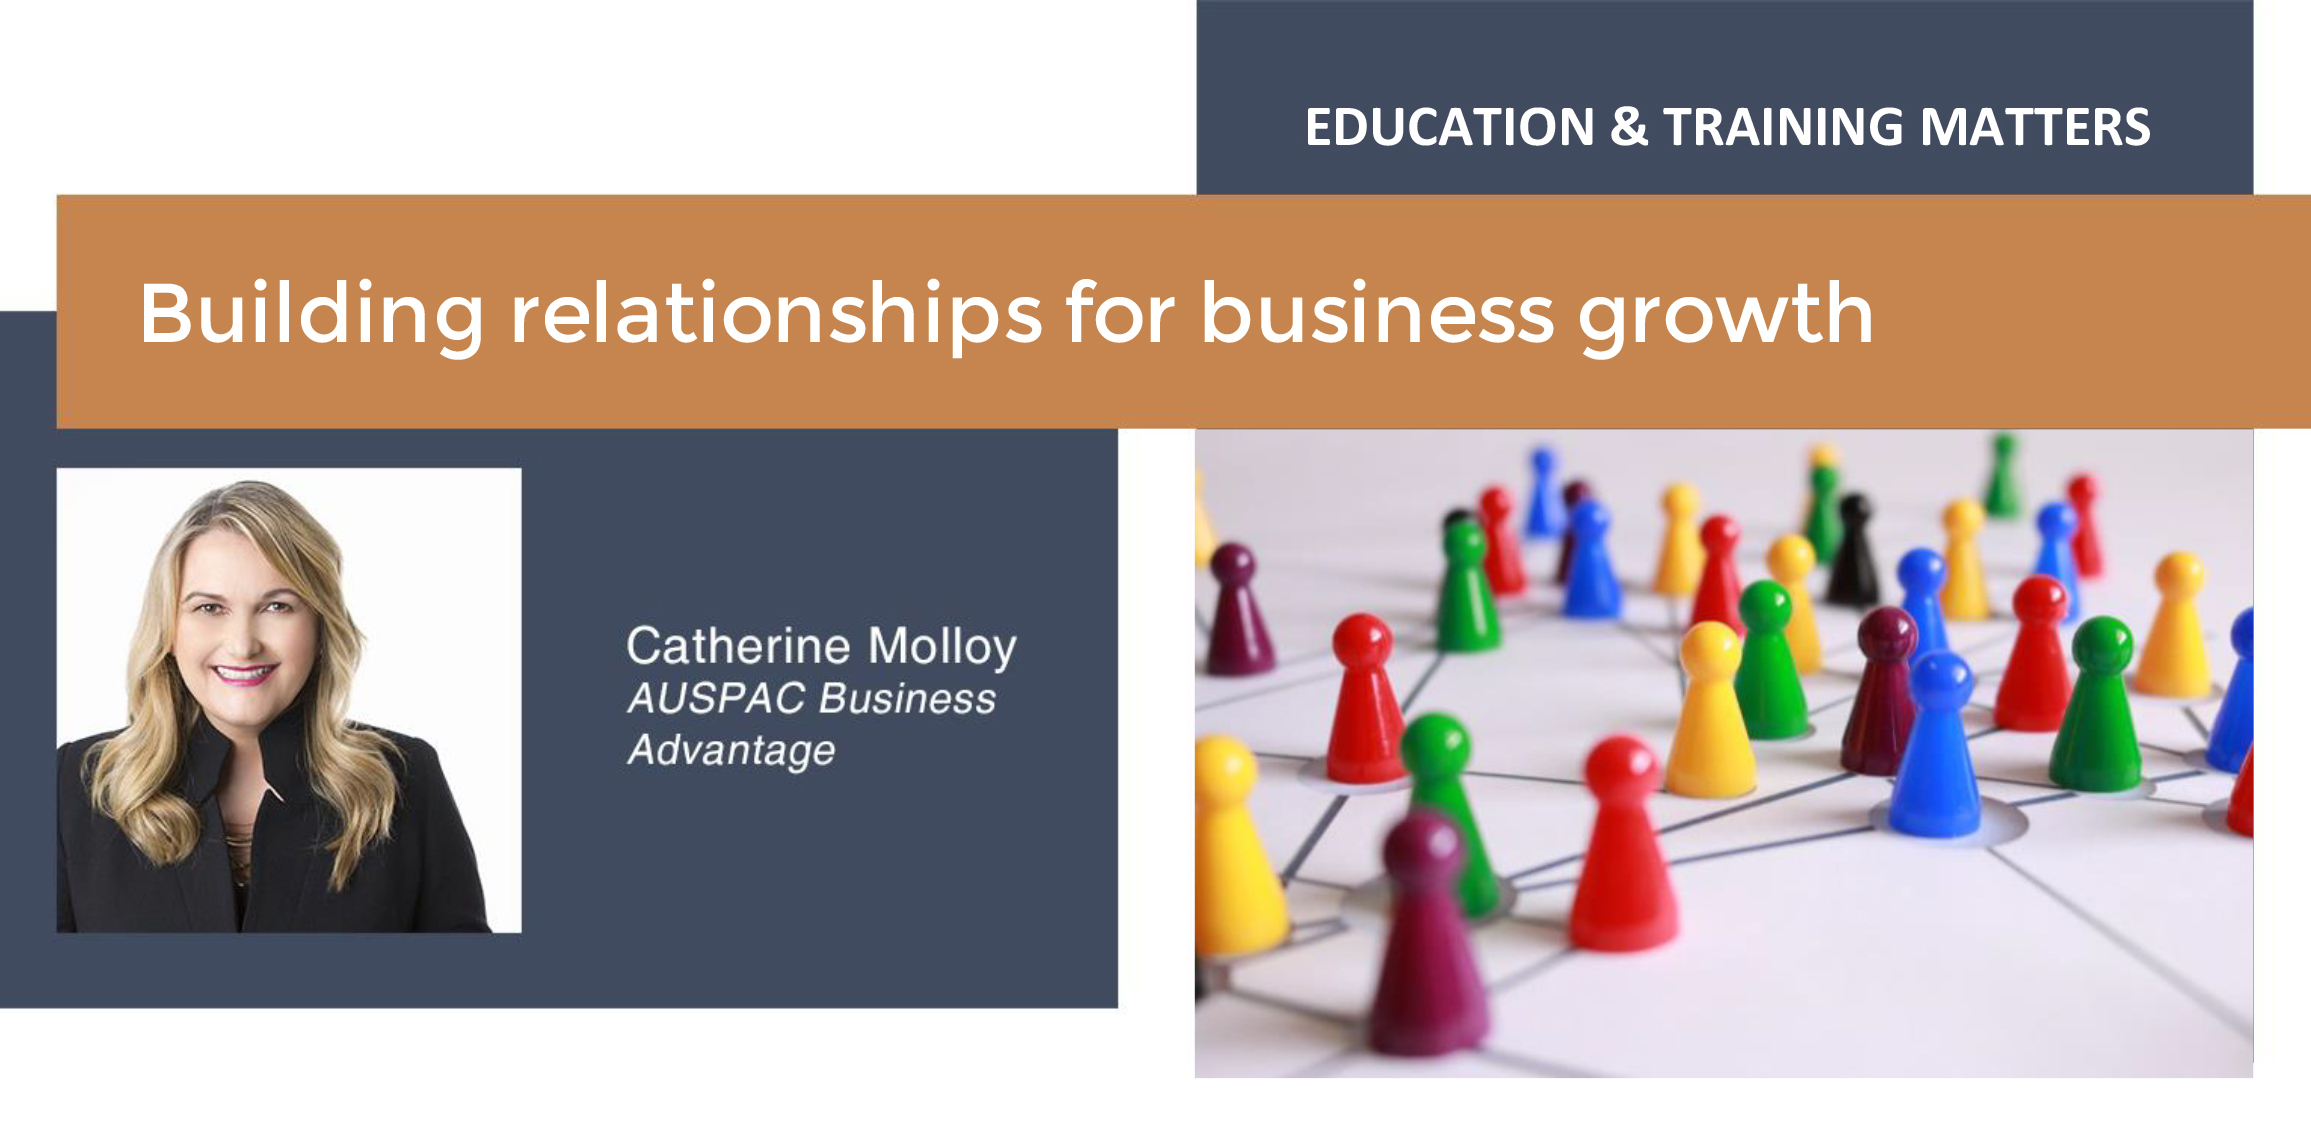 Building relationships for business growth